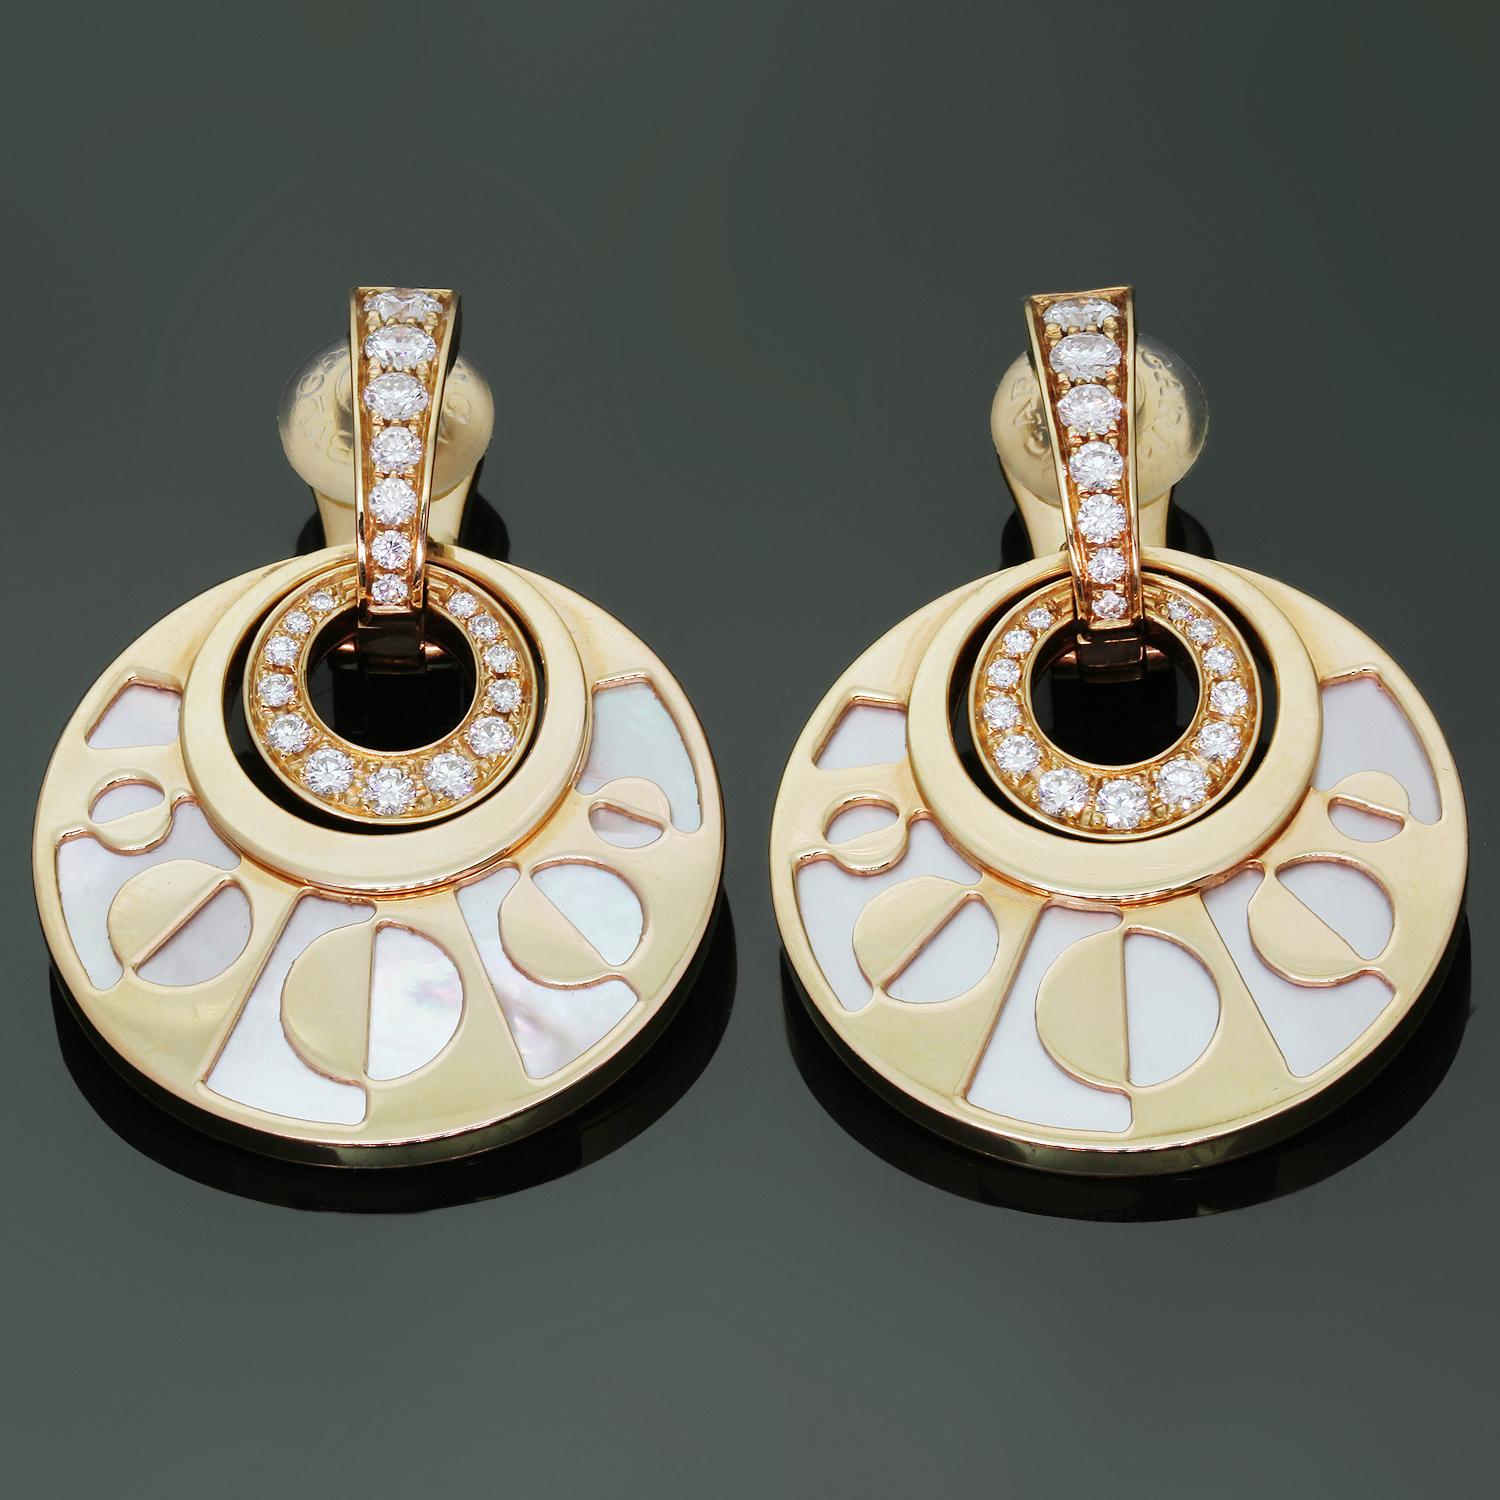 These stunning Bvlgari pendant earrings from the elegant Intarsio collection feature a round geometric cutout design crafted in 18k rose gold and mother-of-pearl and accented with brilliant-cut round E-F VVS1-VVS2 diamonds weighing an estimated 0.95